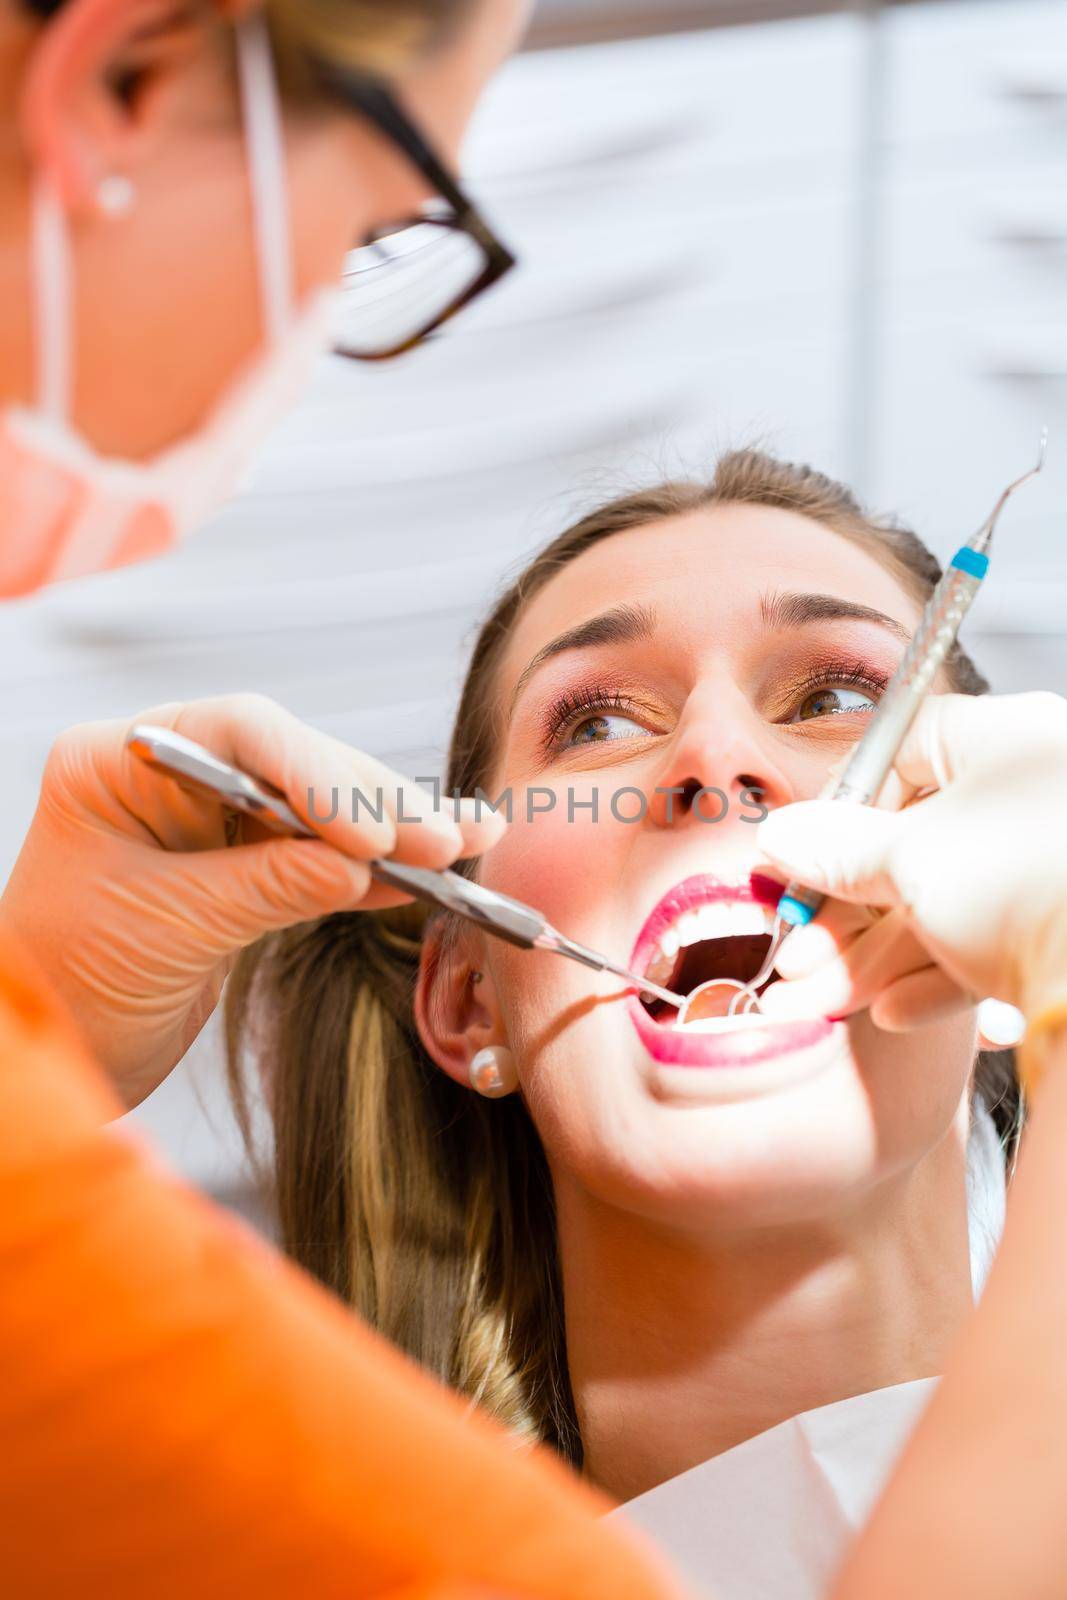 Patient having deep dental tooth cleaning at dentist by Kzenon